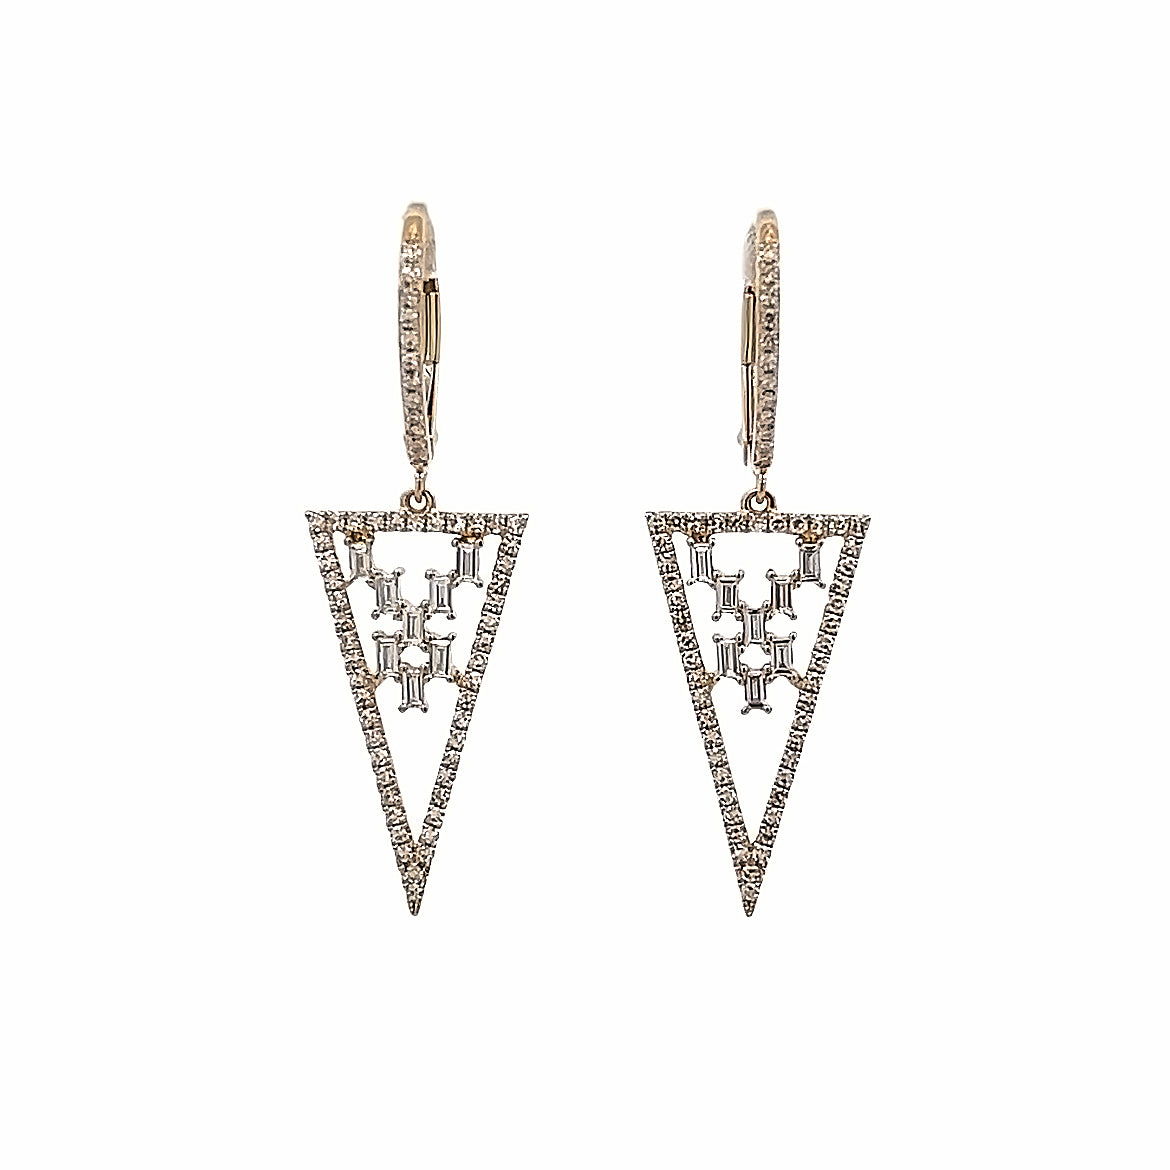 14K GOLD TRIANGLE EARRINGS WITH BAGUETTE DIAMONDS